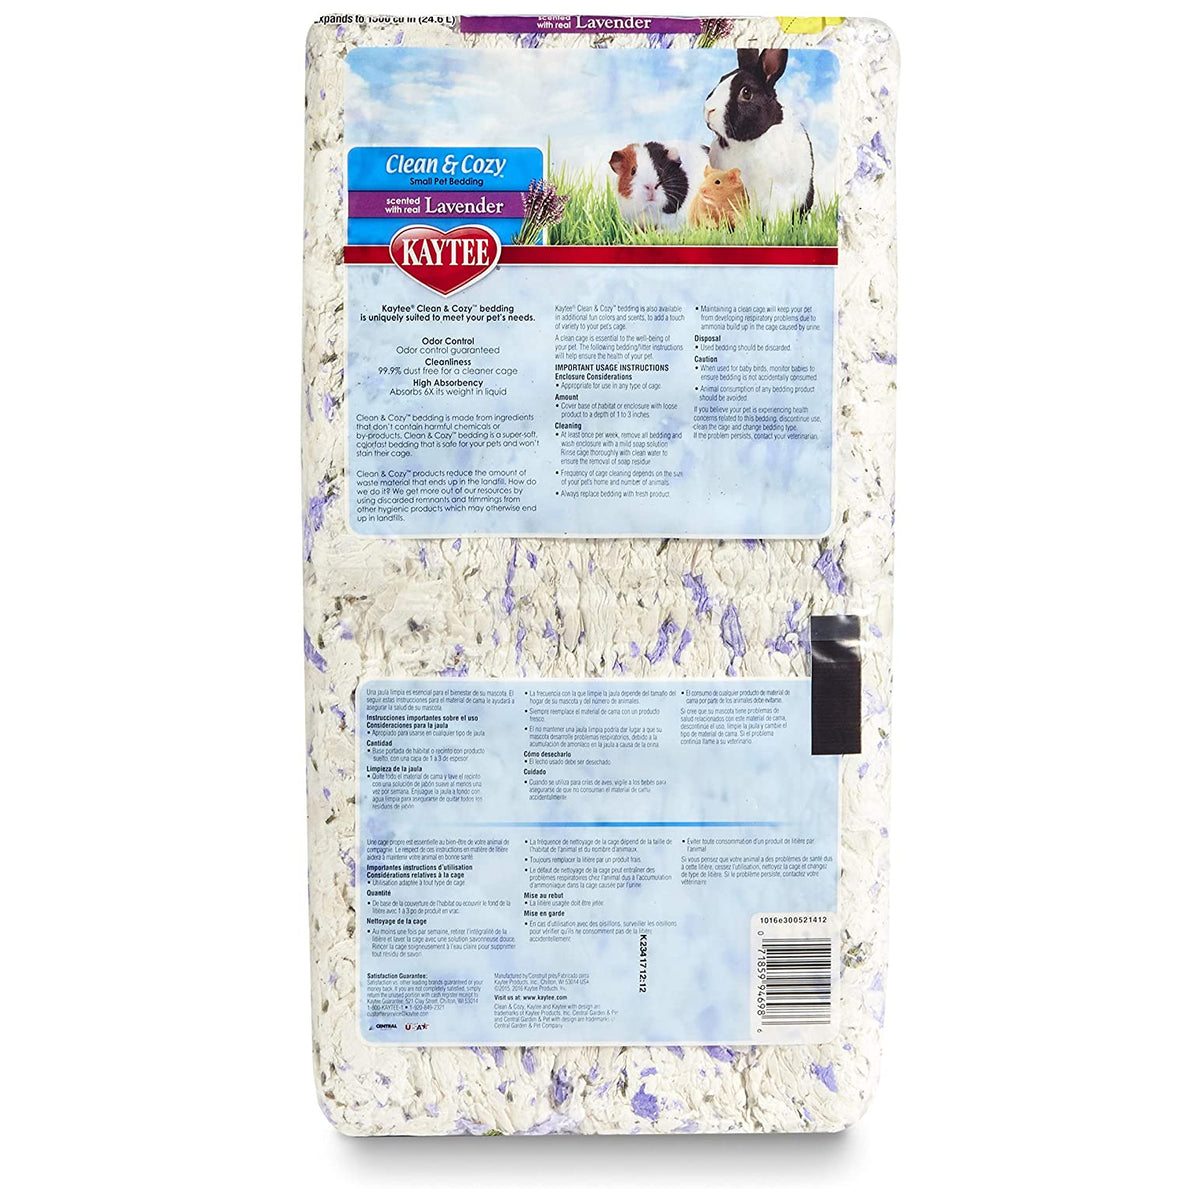 Kaytee 100509425 Clean & Cozy Small Pet Bedding, Lavender, Expands to 1500 Cu.In.